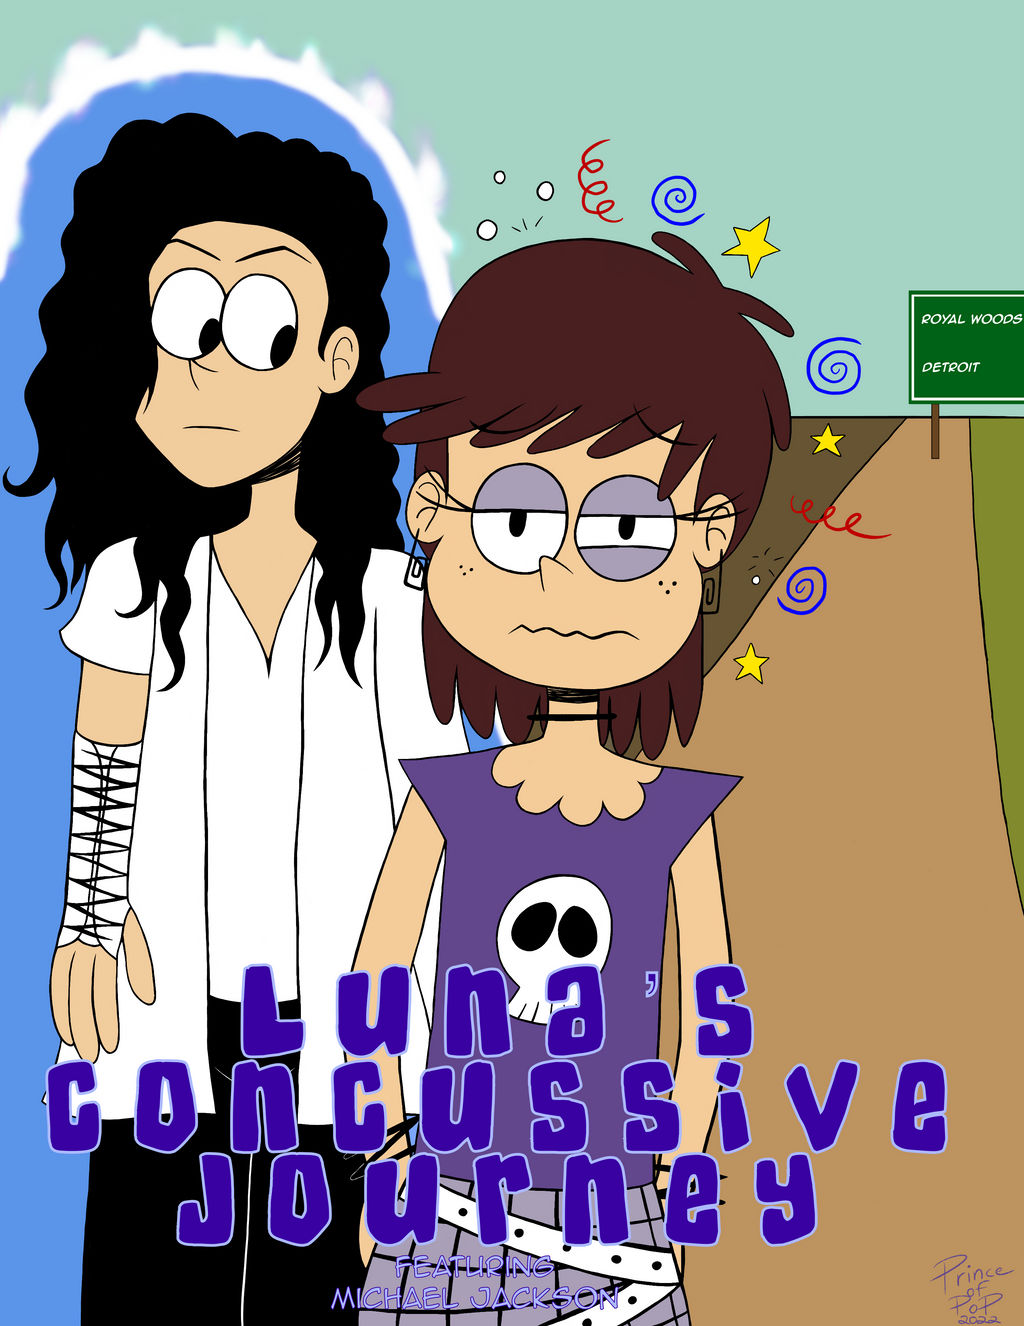 lunas_concussive_journey_cover_by_prince_of_pop_dfby5yt-fullview.jpg